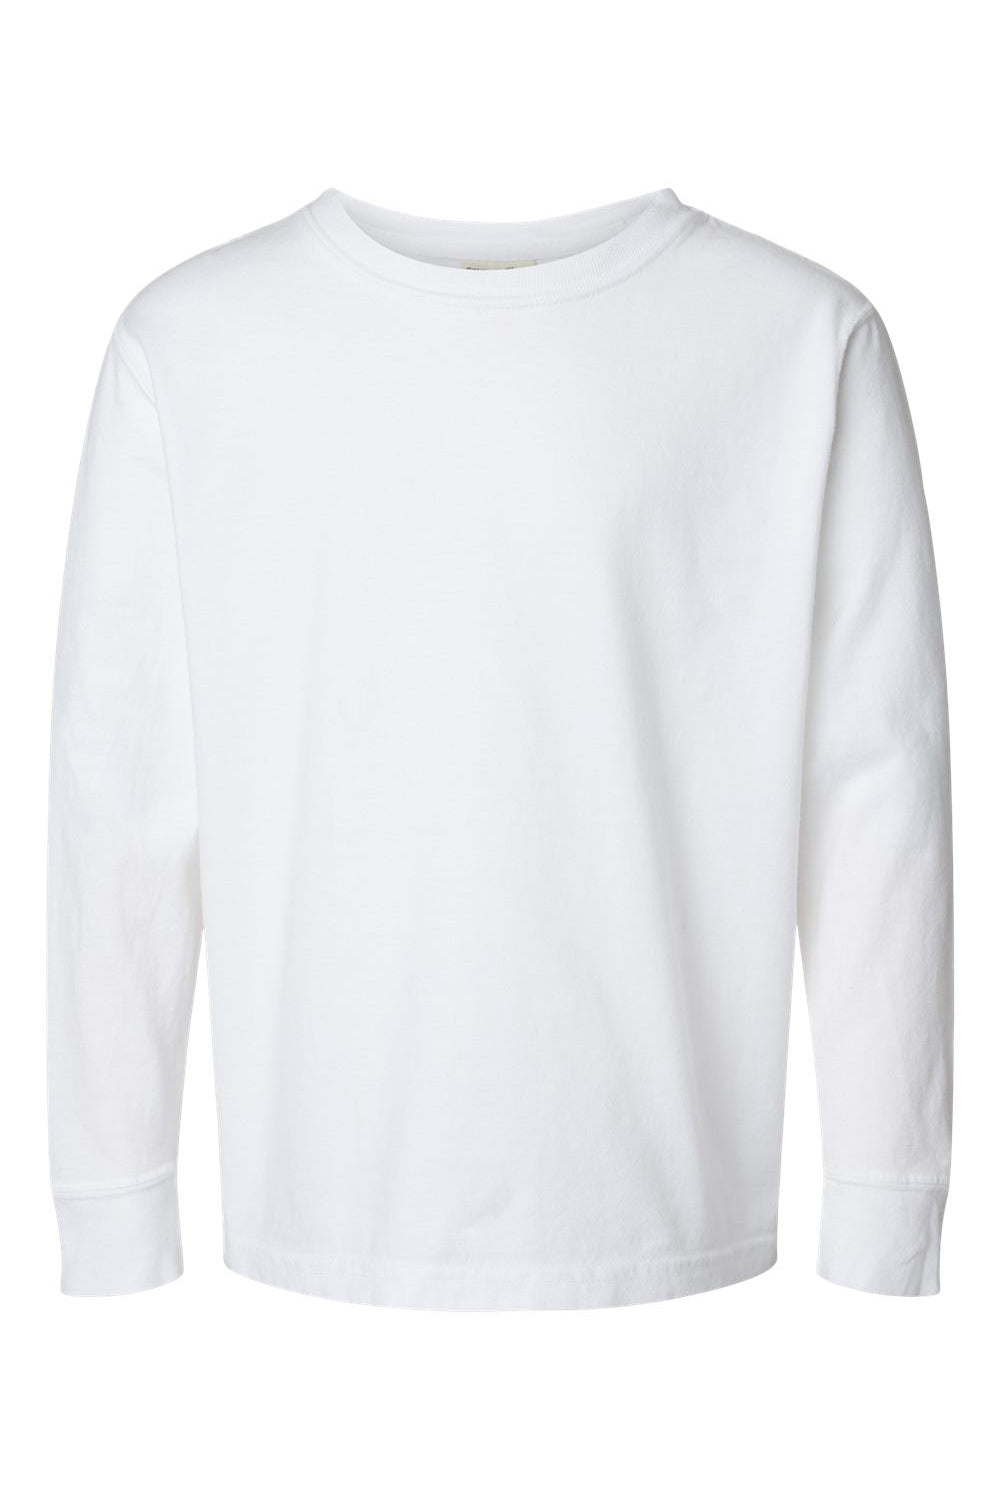 ComfortWash By Hanes GDH275 Youth Garment Dyed Long Sleeve Crewneck T-Shirt White Flat Front